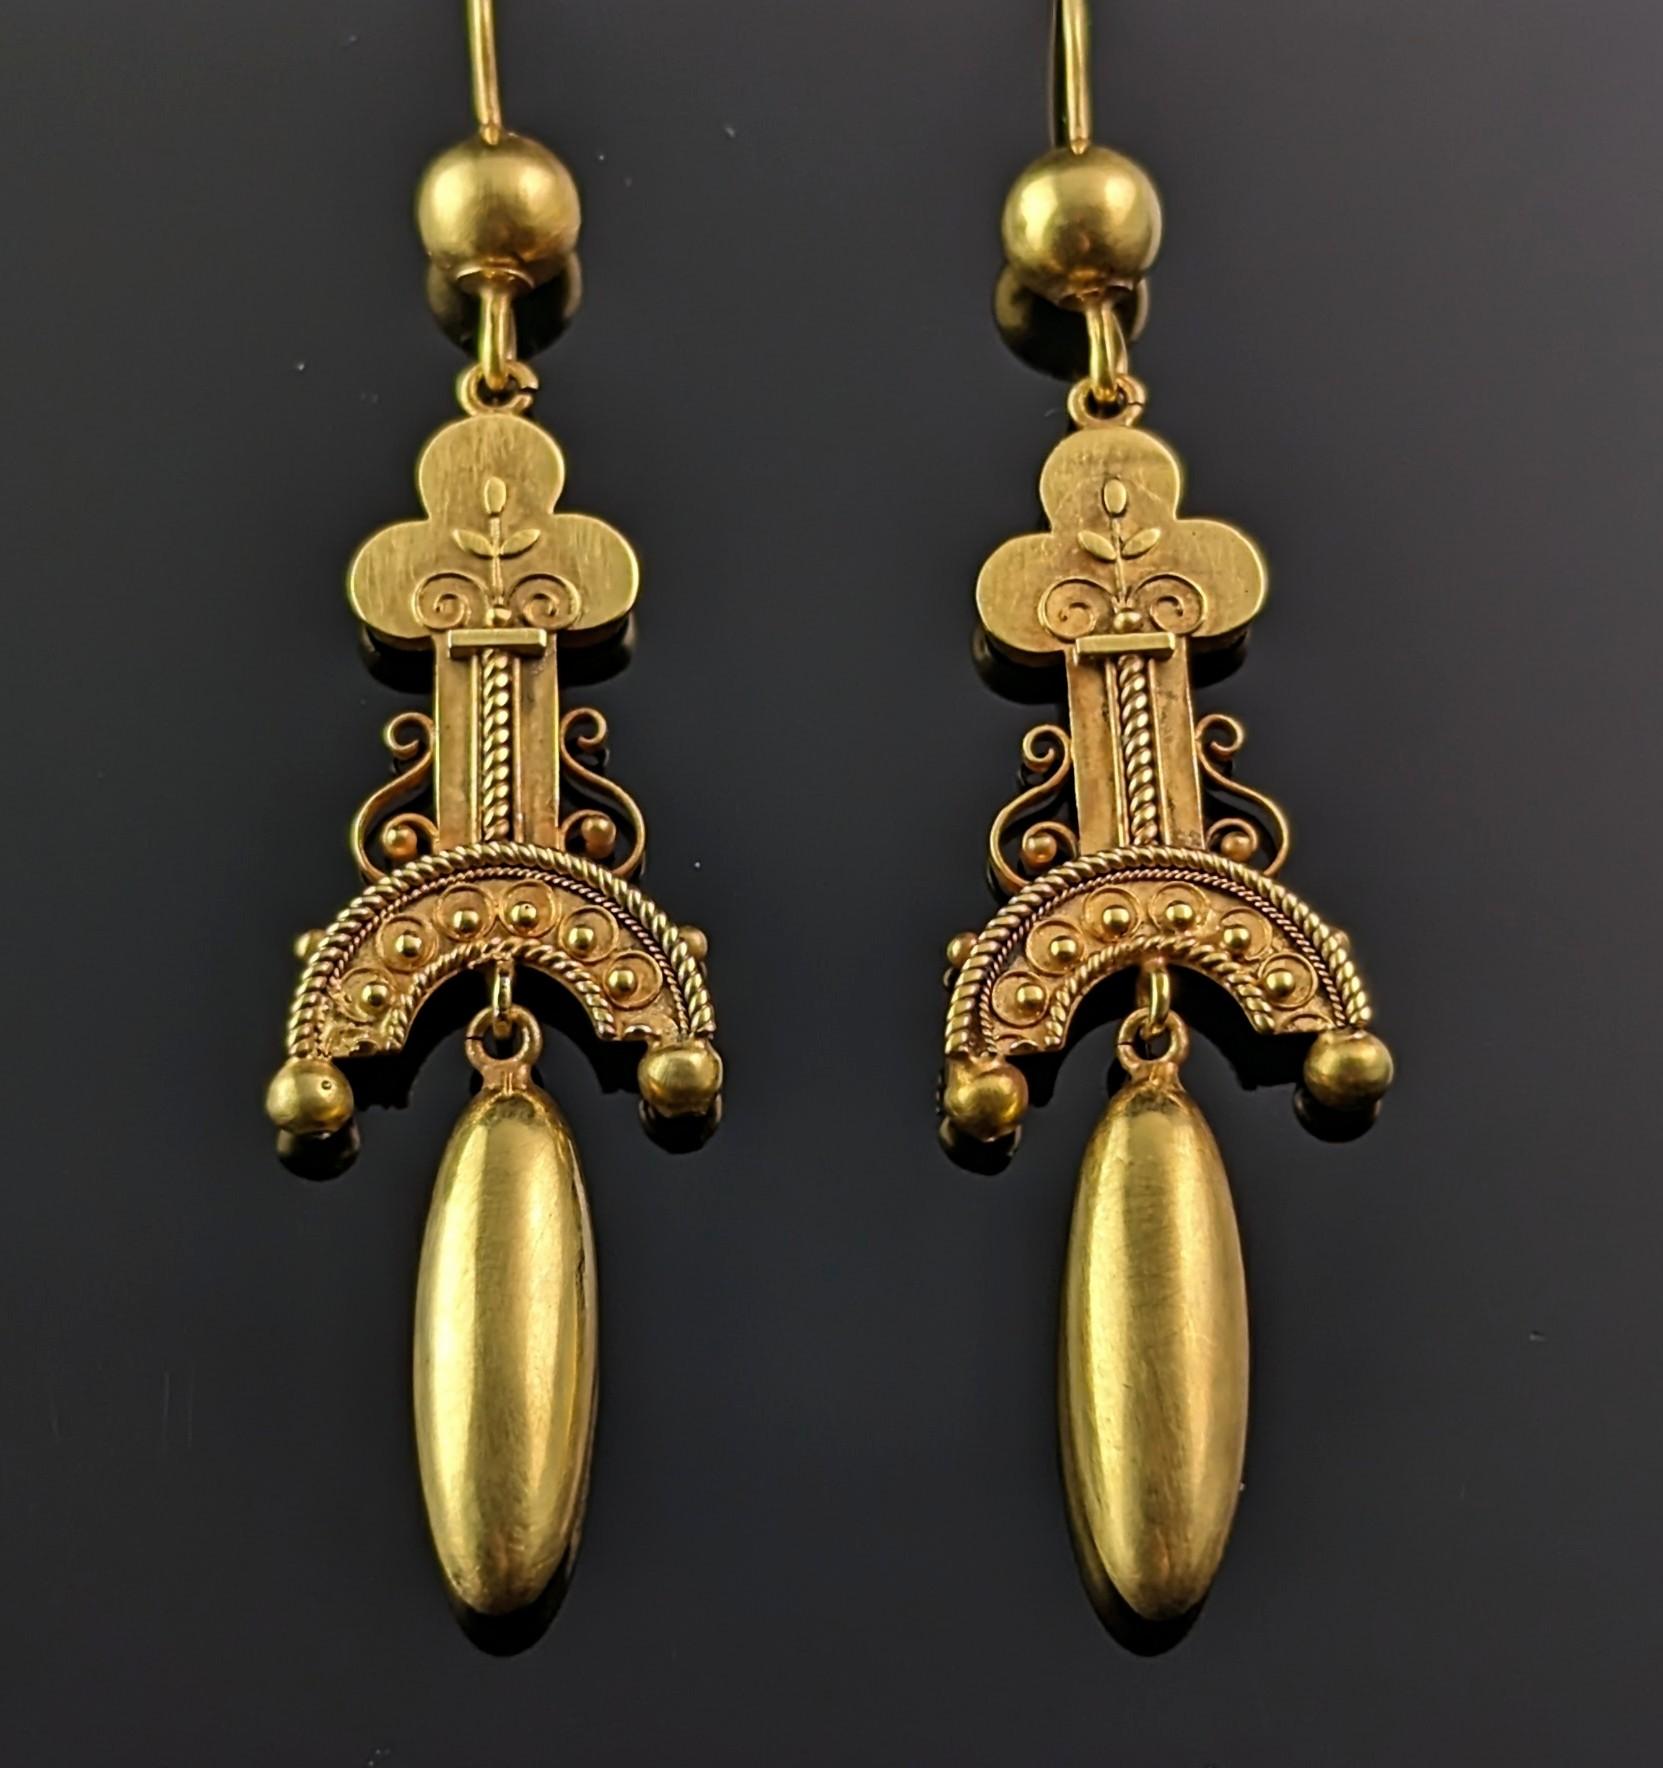 A truly stunning pair of antique 15ct gold Etruscan revival style earrings.

They are dangly earrings the tops made up of a trefoil or club shaped column with delicate cannetille detailing and wirework to the sides.

Suspended from here there is a